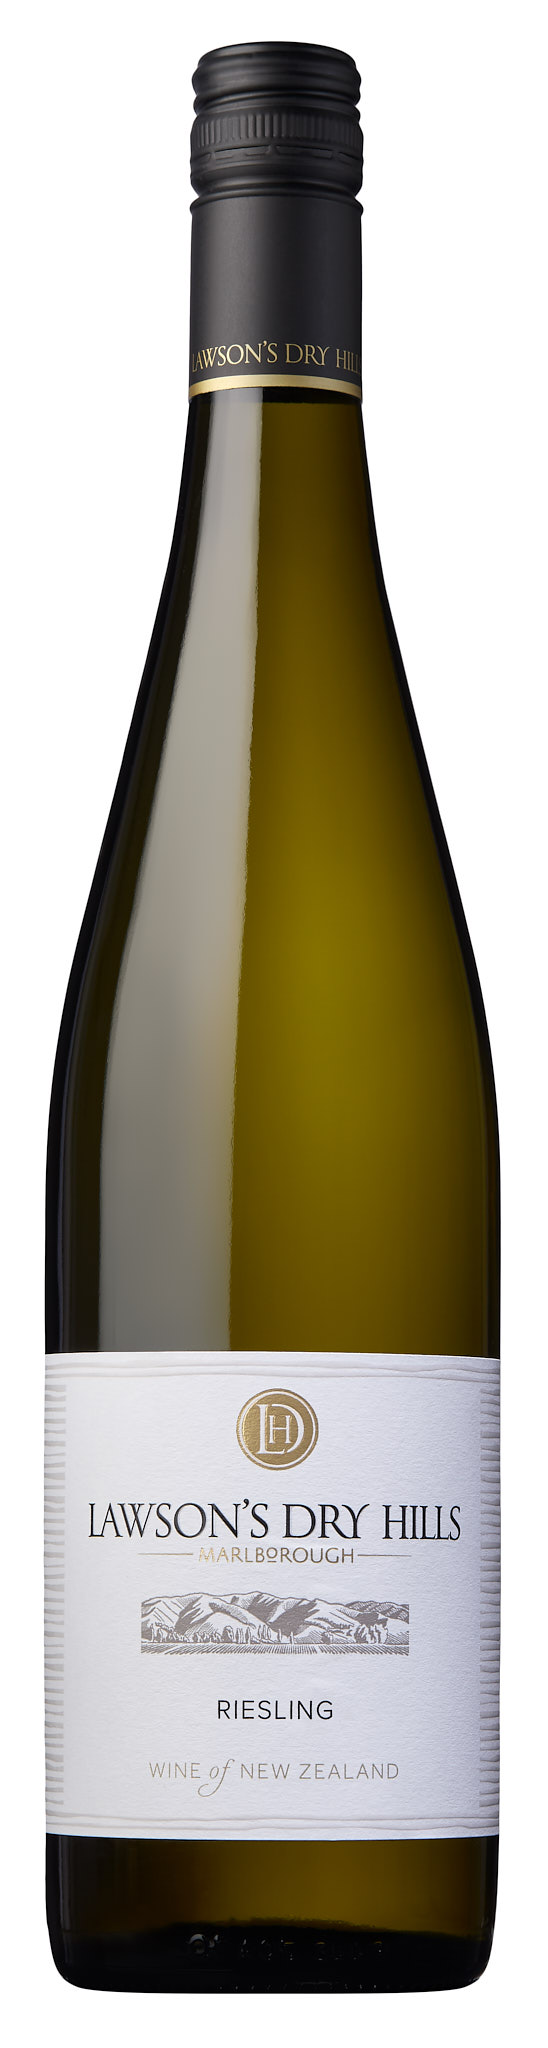 Lawson's Dry Hills - Riesling